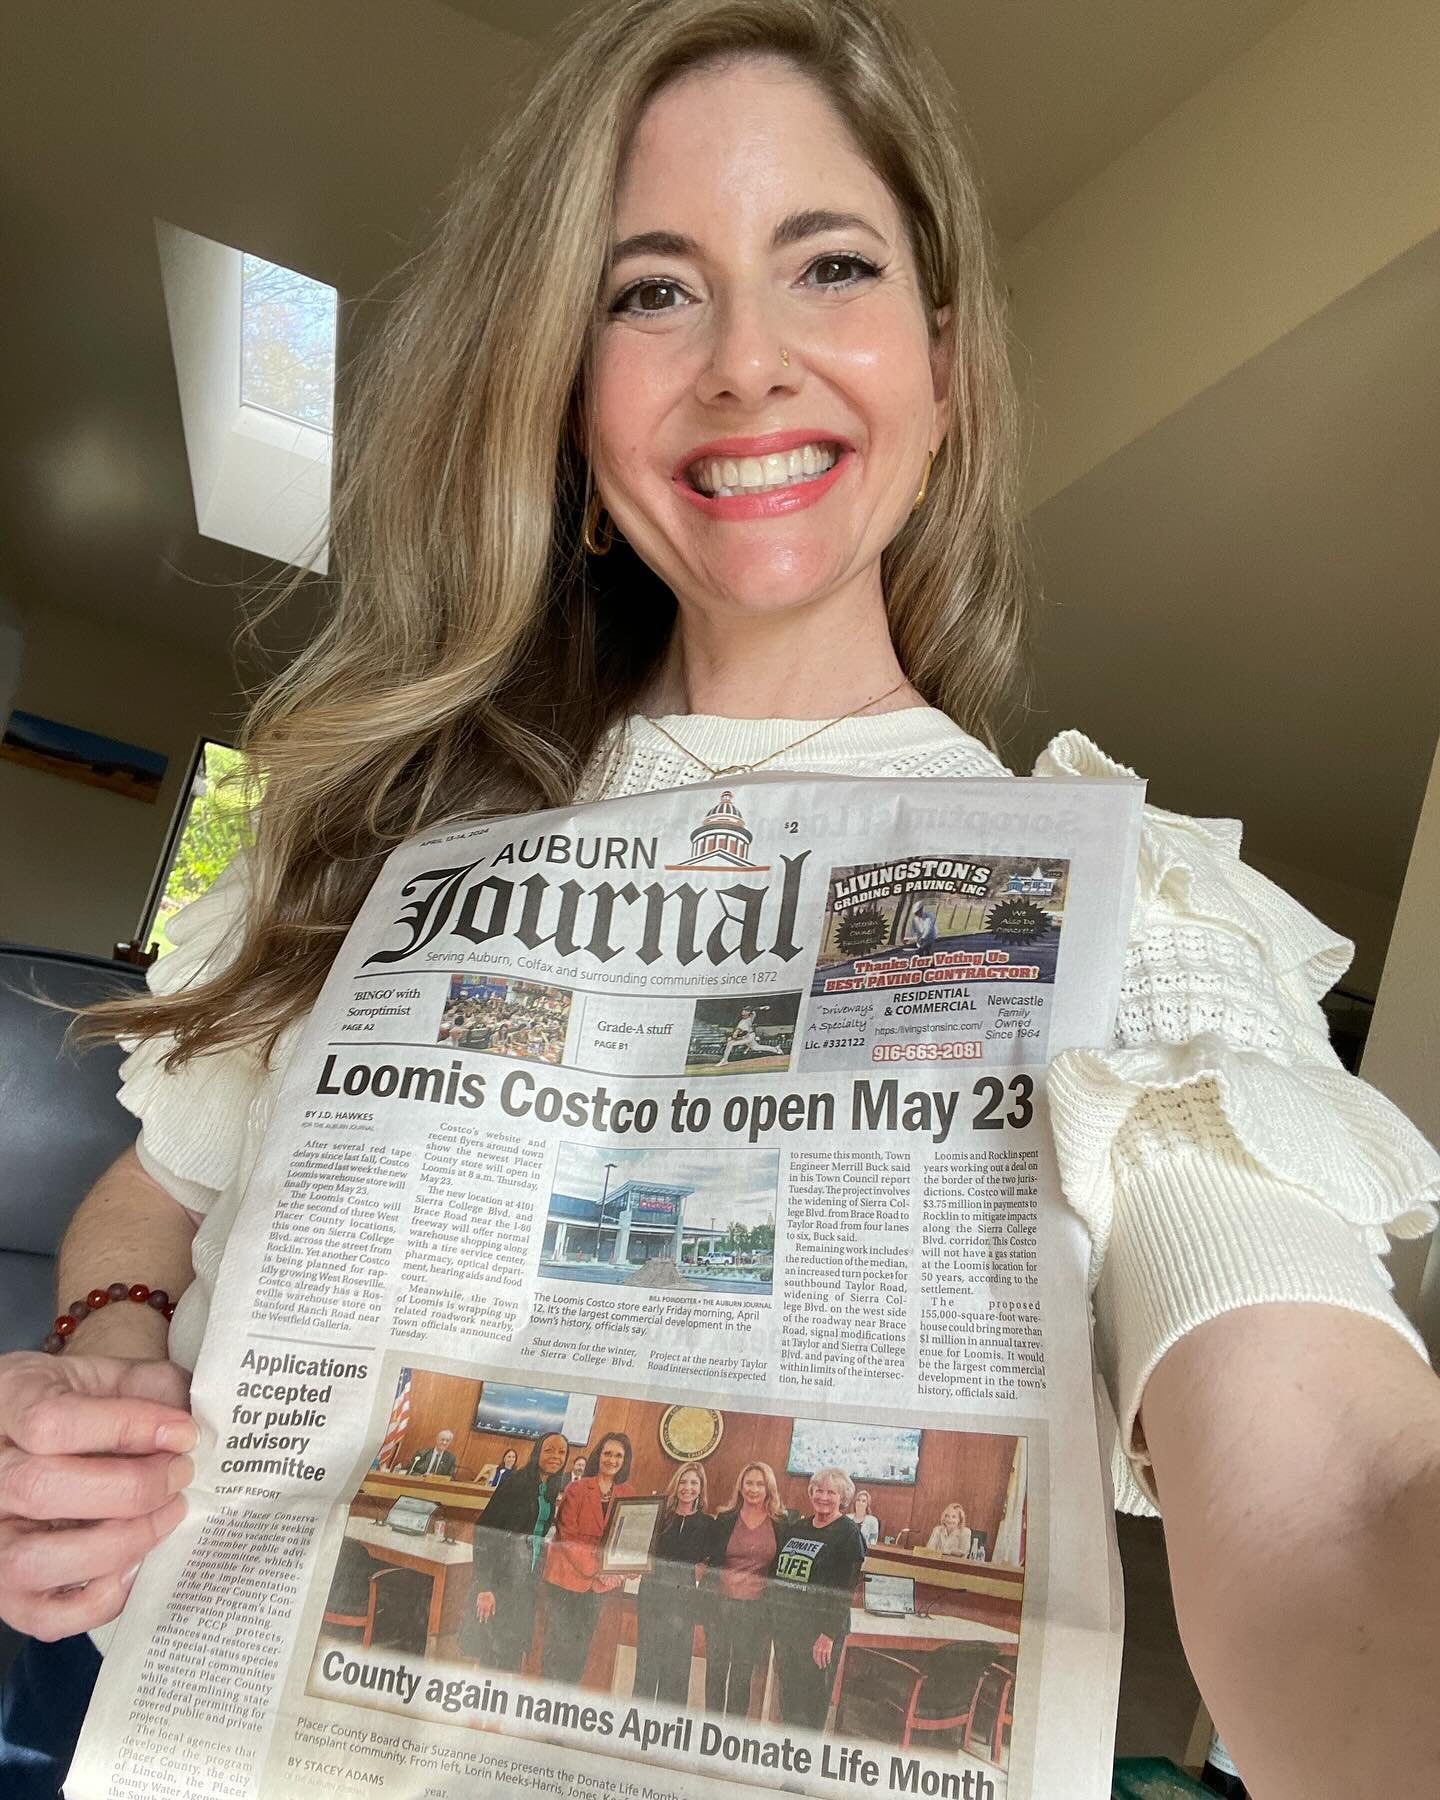 👋🤩On the front page news sharing the amazing #DonateLifeMonth initiatives that have been going on! It&rsquo;s been an incredible month and it&rsquo;s only going to get better&hellip;

✅ Launched our podcast Unpacking the Gift of Life!!! Listen to E